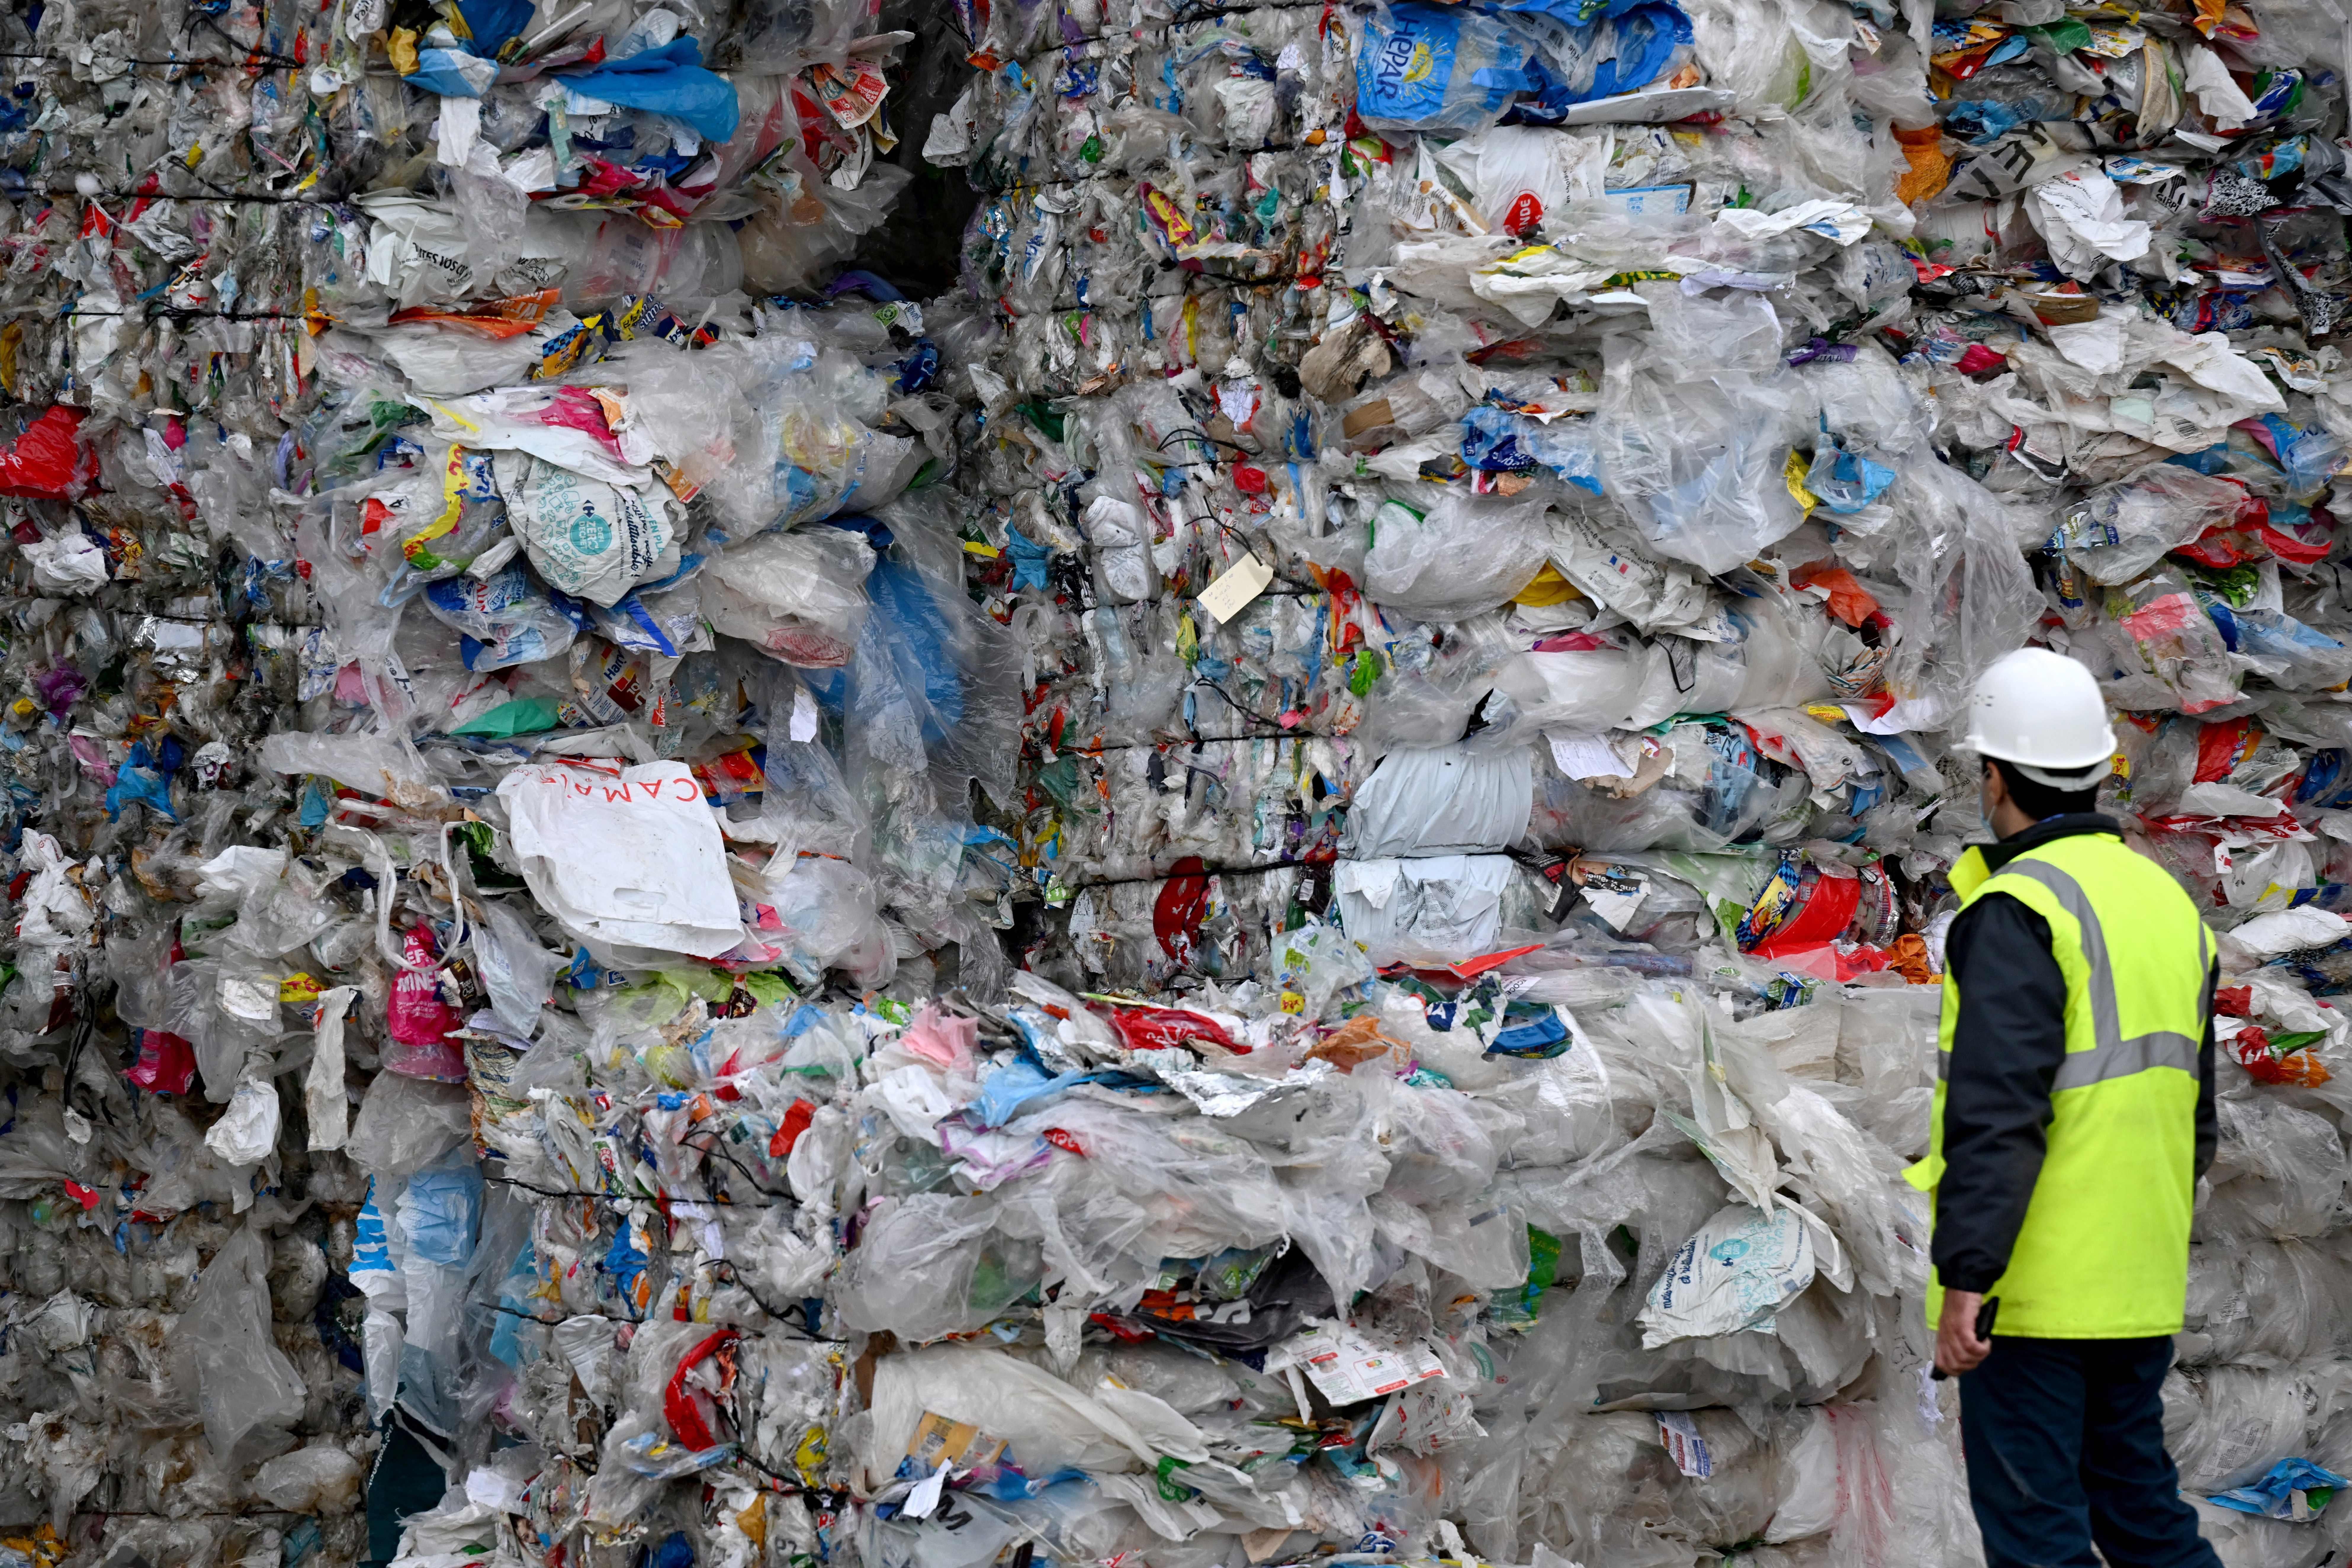 A man wearing a hard hat and yellow construction vest looks at towering stacks of bundled plastic waste.